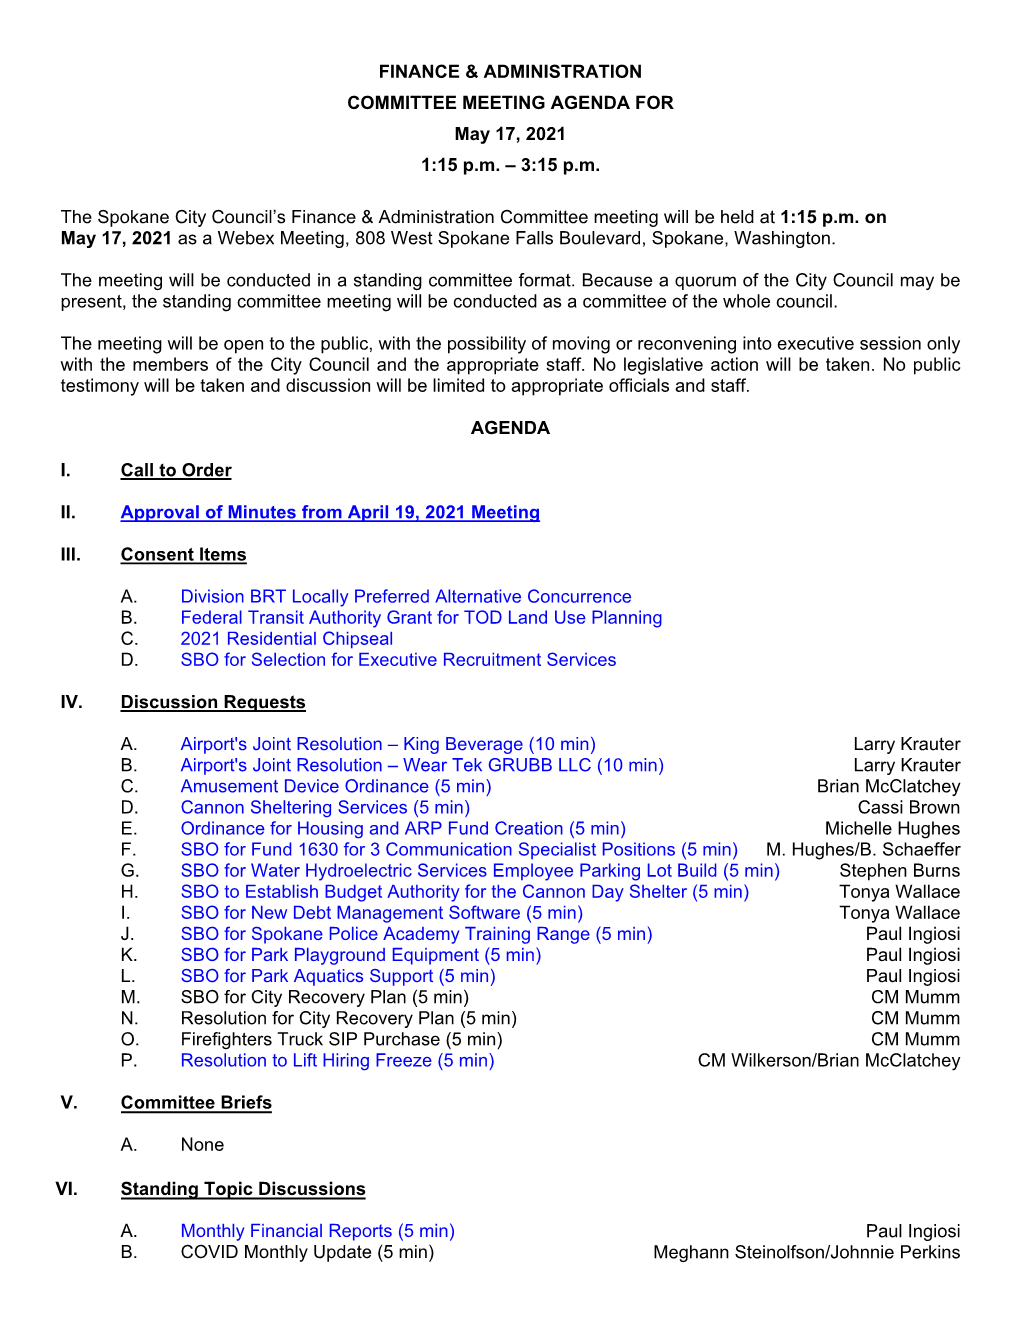 Finance and Administration Committee Agenda May 17, 2021